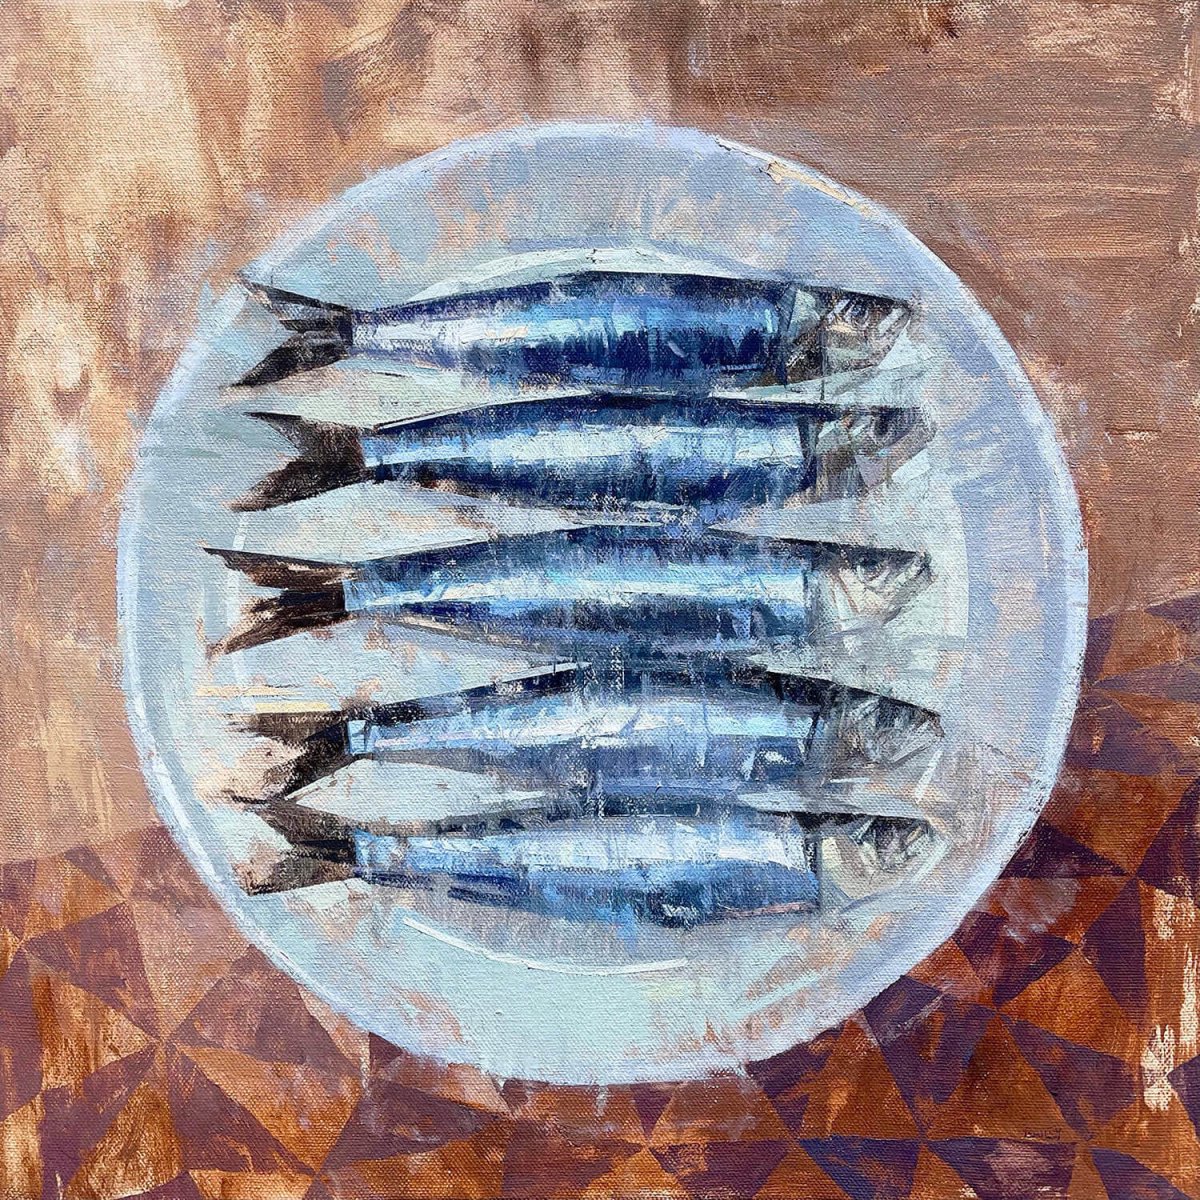 Sardines by Mark Bailey at LePrince Galleries